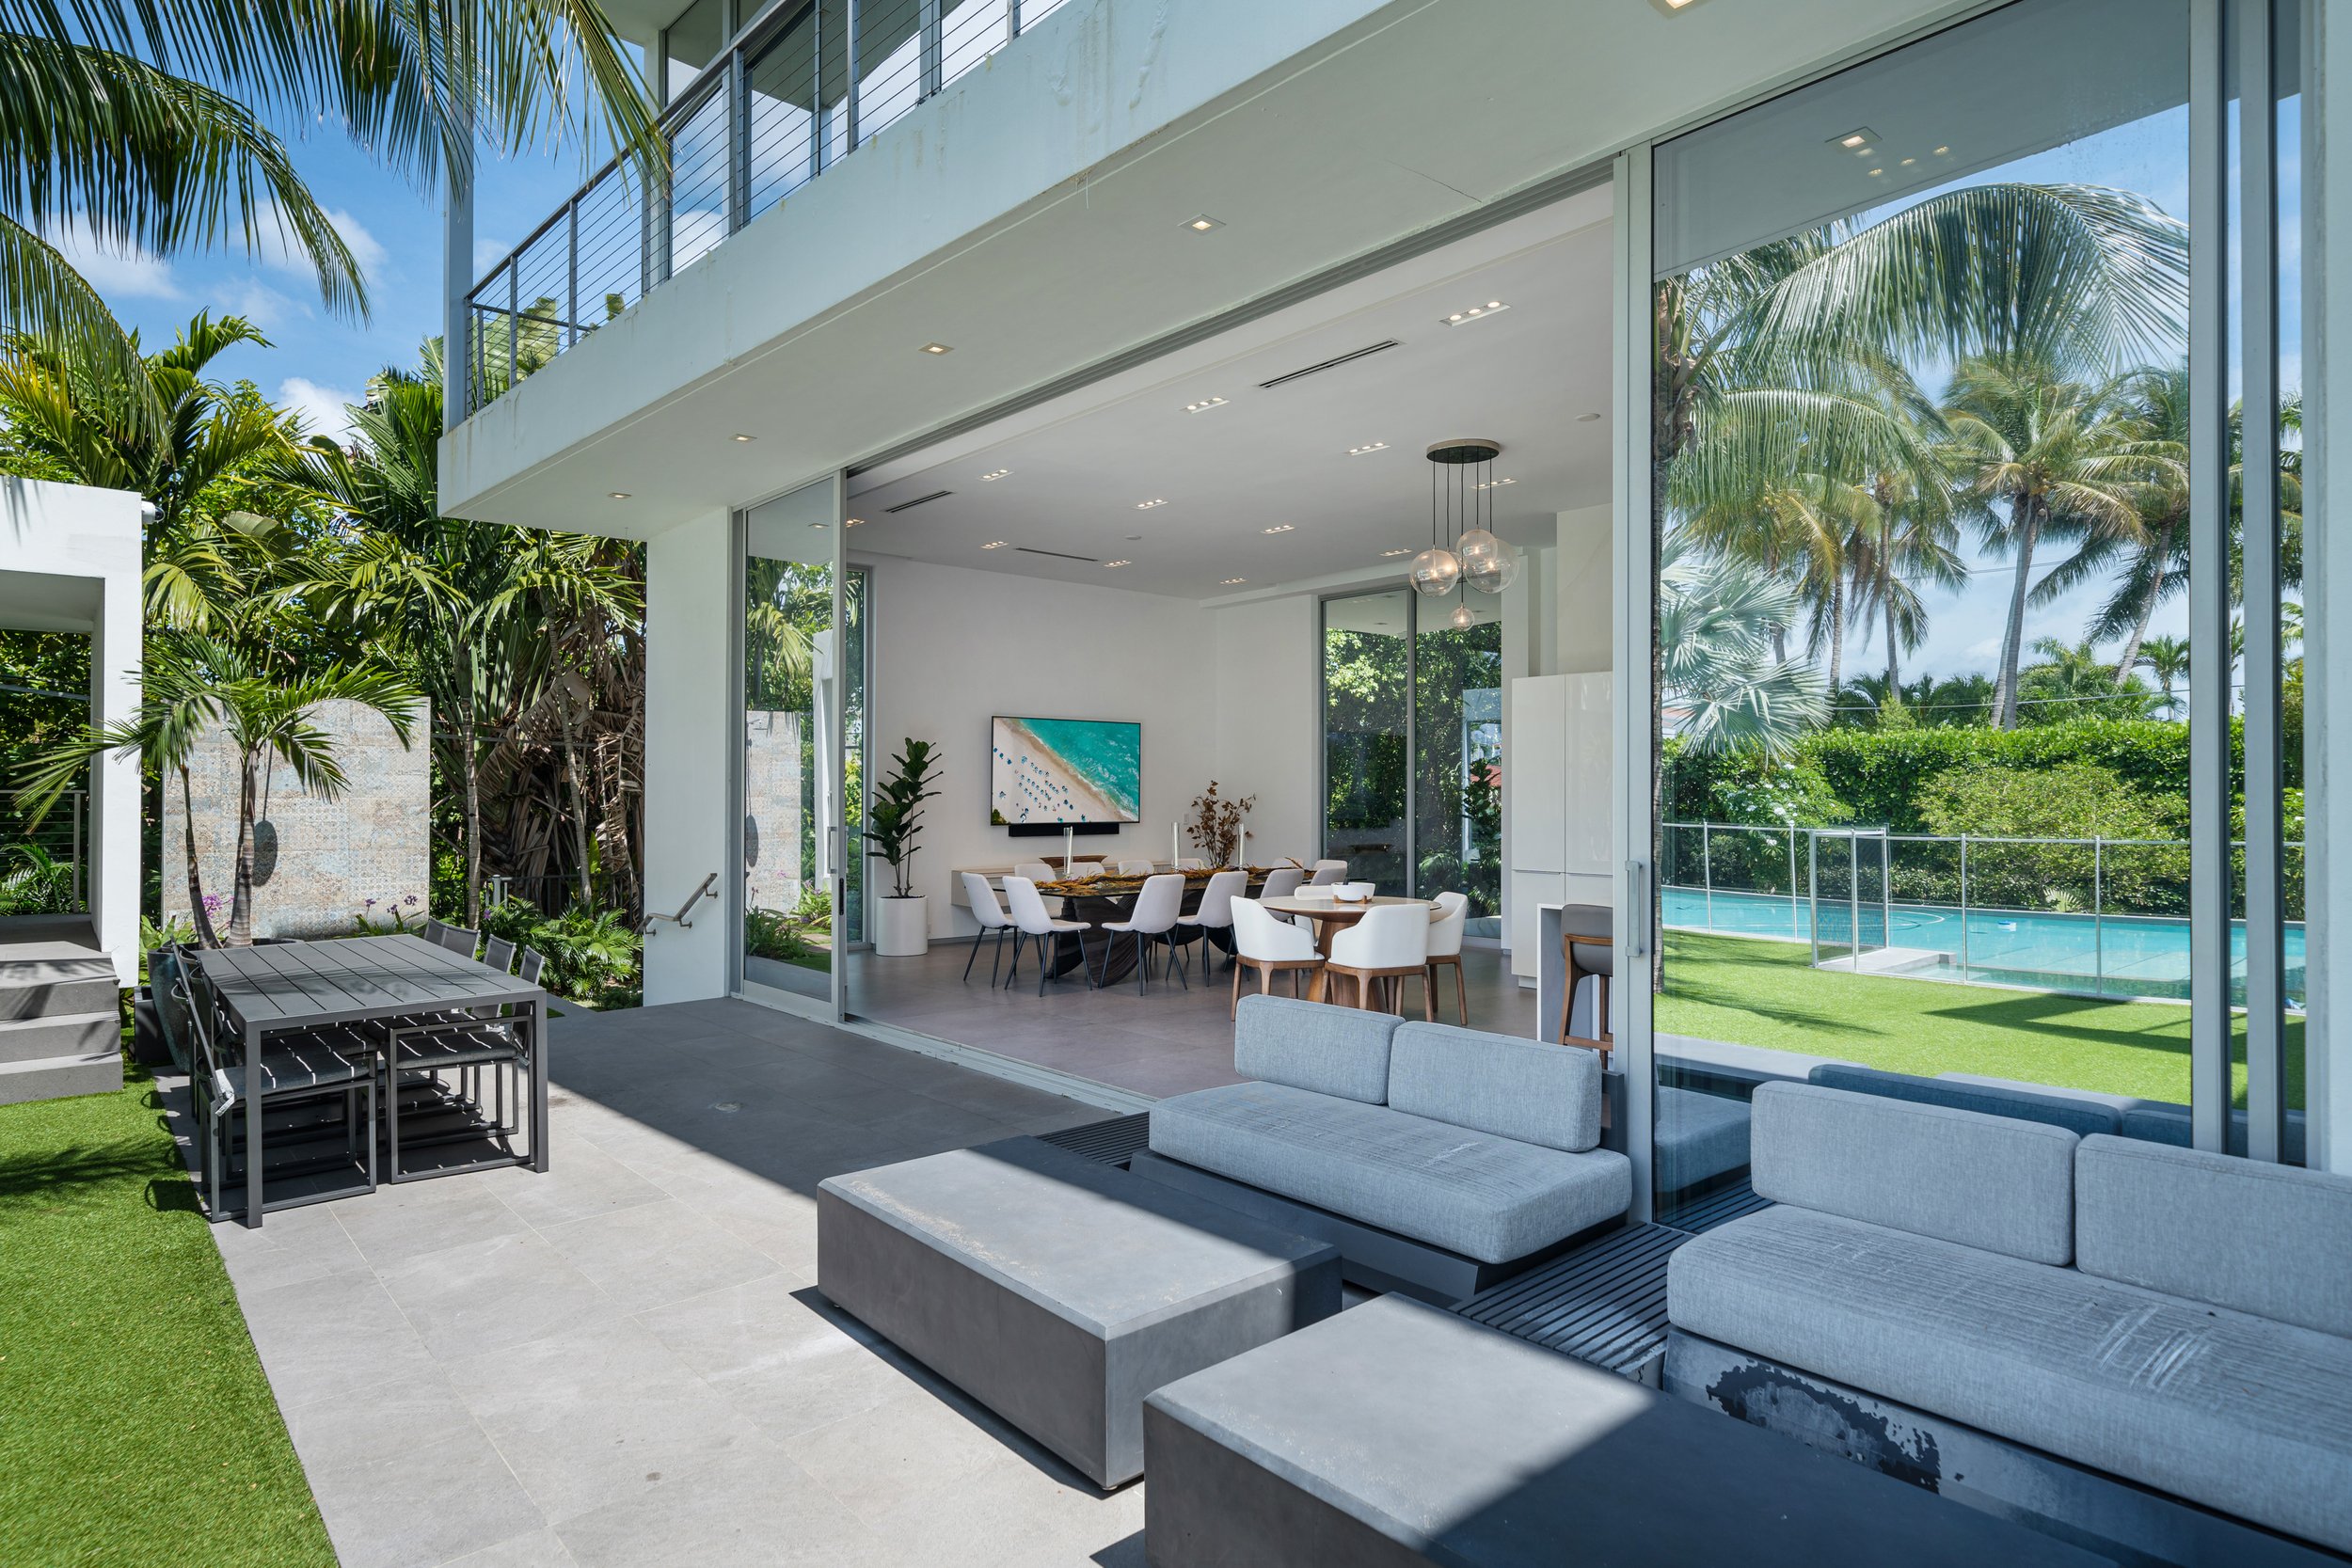 Miami Heat Star Victor Oladipo Lists Hibiscus Island Contemporary For $10 Million Amidst NBA Finals 12.jpg